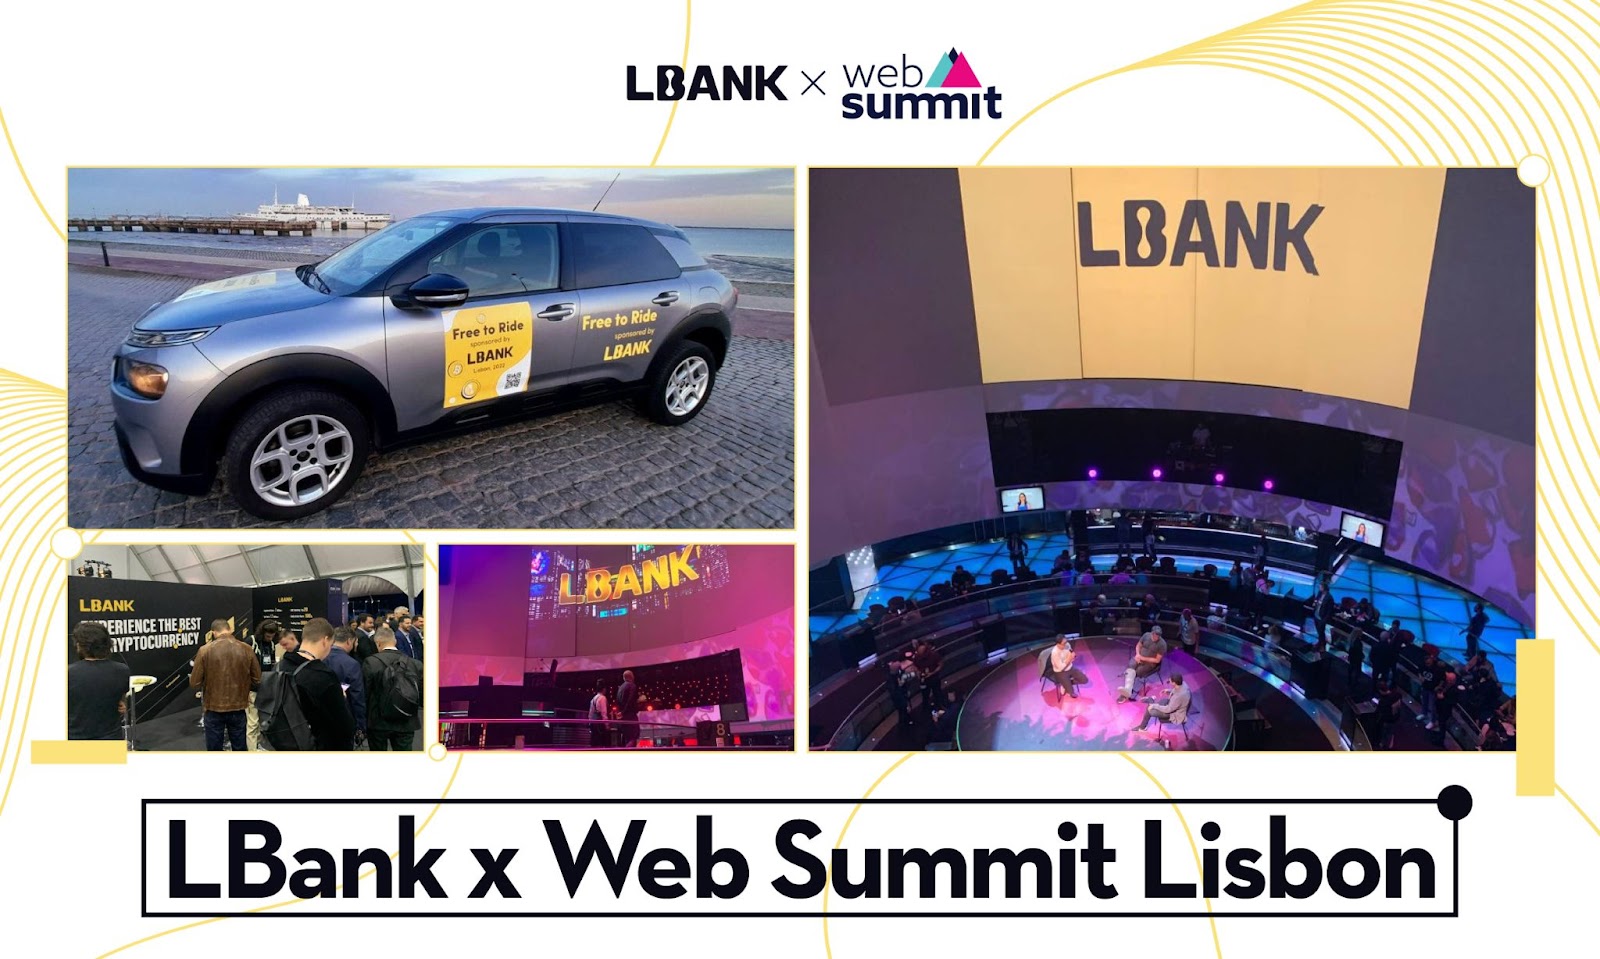 Lbank’s Successful Web Summit Lisbon Exhibition, Free to Ride Campaign, and More – Press release Bitcoin News